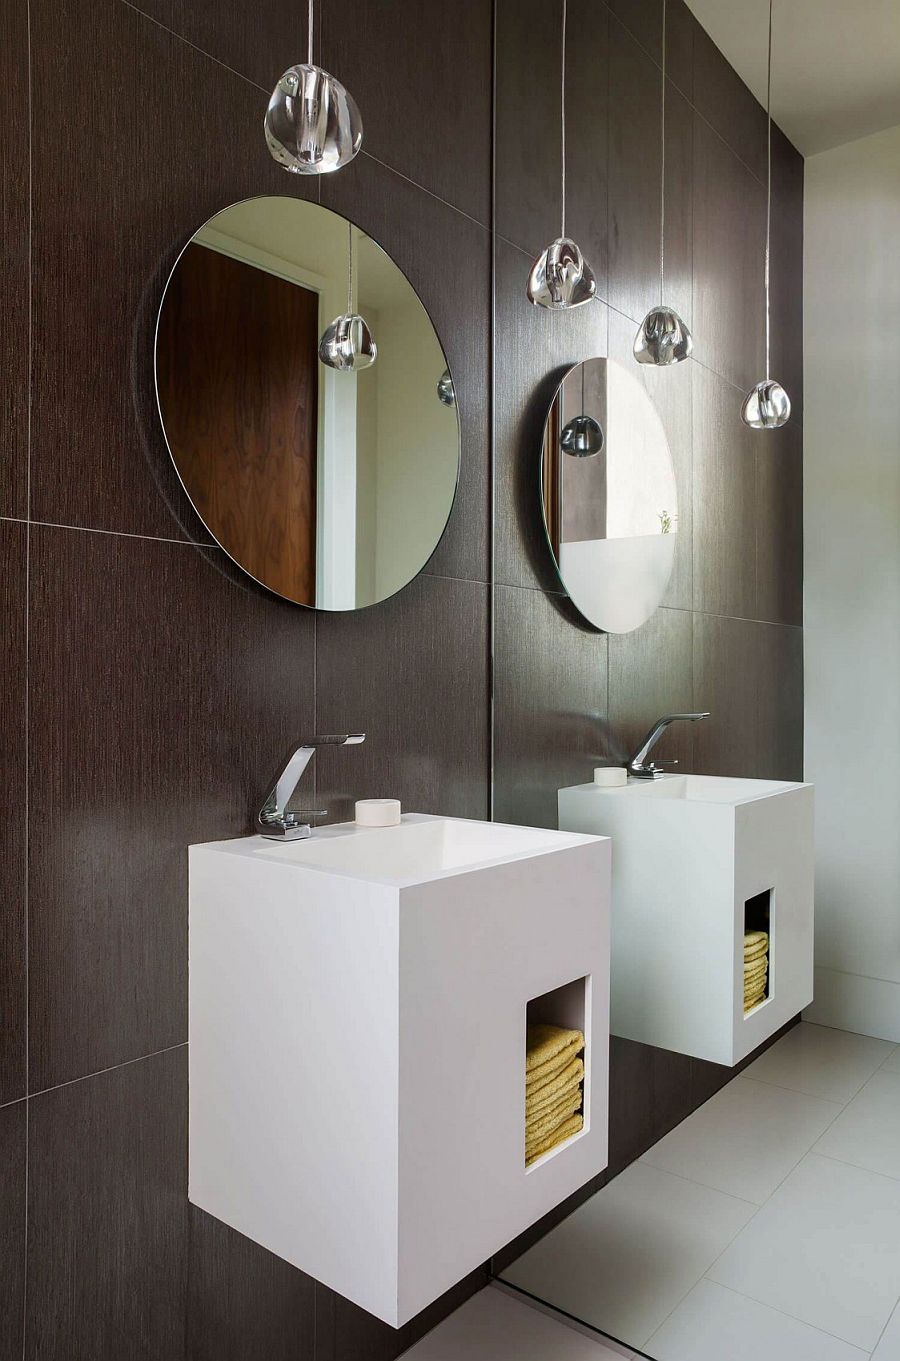 Circular mirrors and stunning pendant lights inside contemporary bathroom in gray